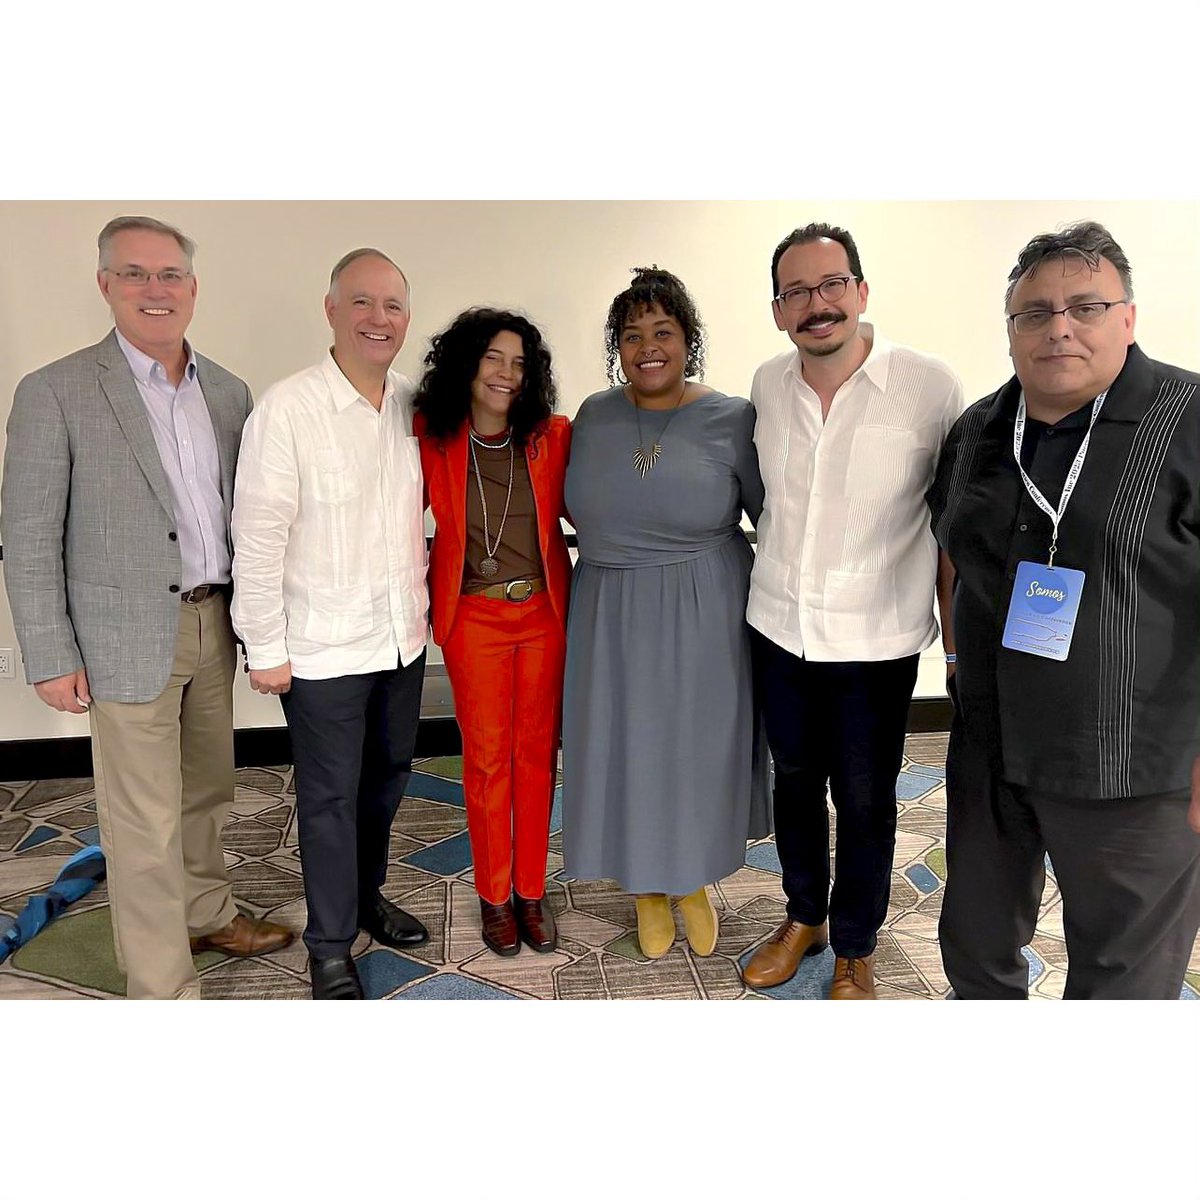 President Boudreau, Chancellor Rodríguez, Dr. Hernandez, Dr. Figueroa-Vásquez, Dr. Higuera López, & President Delgado gathered at Somos 🇵🇷 for an event that honored Francisco Diaz, Chairman of Somos Inc & LC alum; to strengthen & support communities served by CUNY institutes.